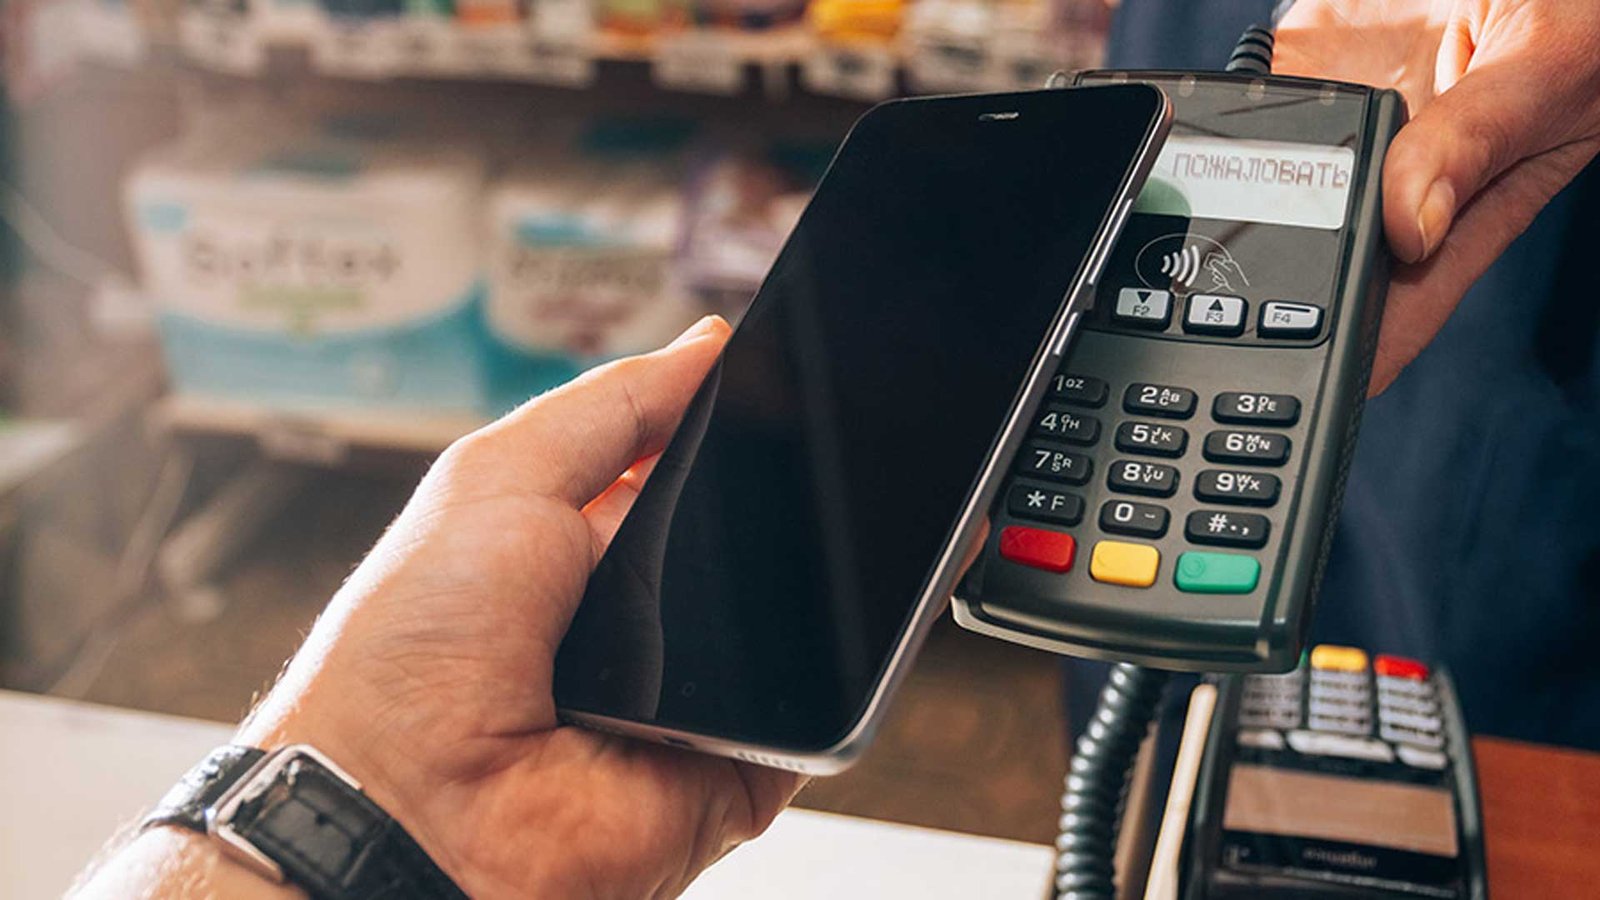 Top 7 Digital Payment Trends For 2020